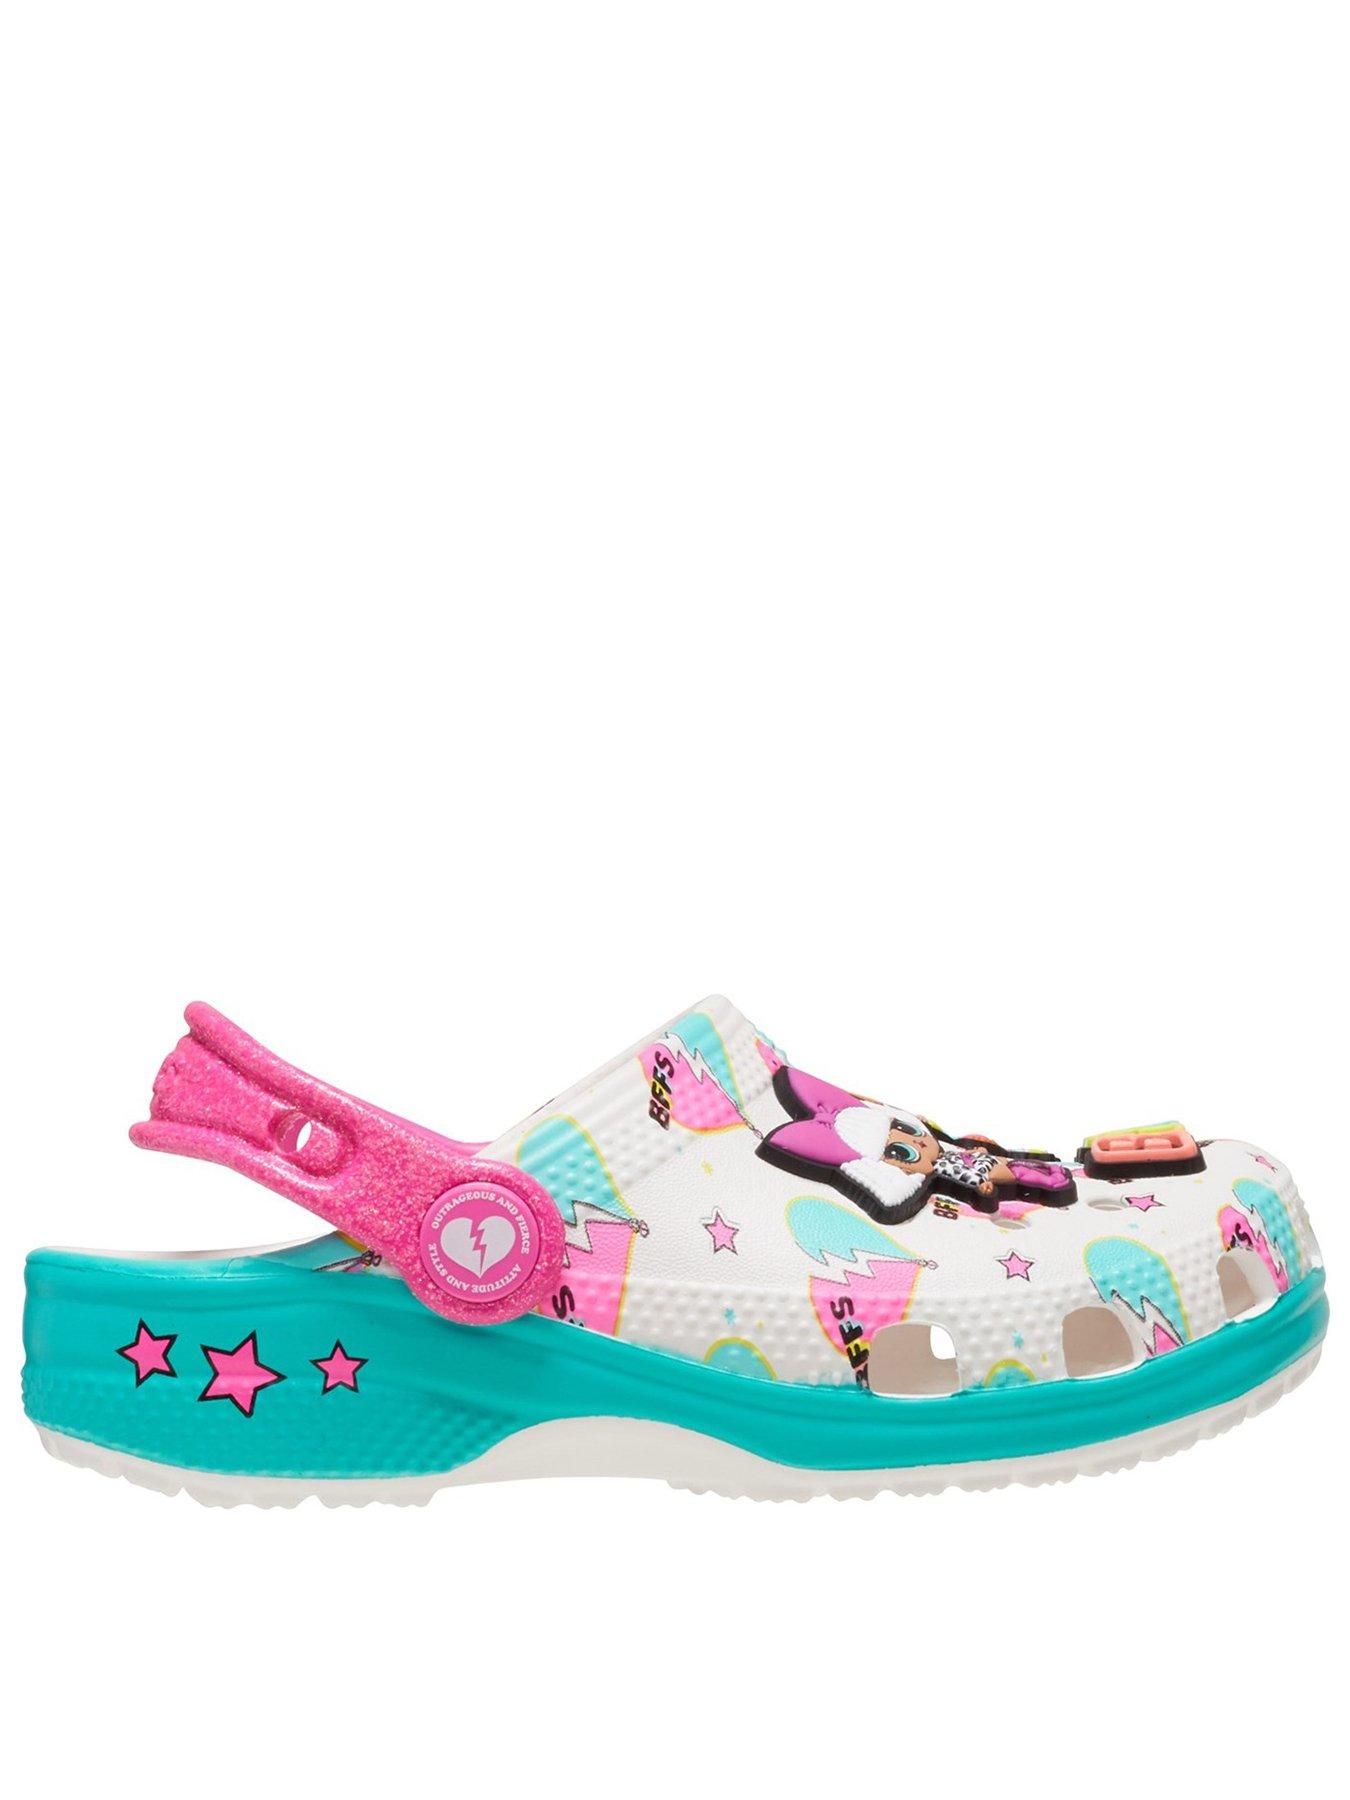 Crocs White Multi Lol Bff Toddler, White, Size 8 Younger